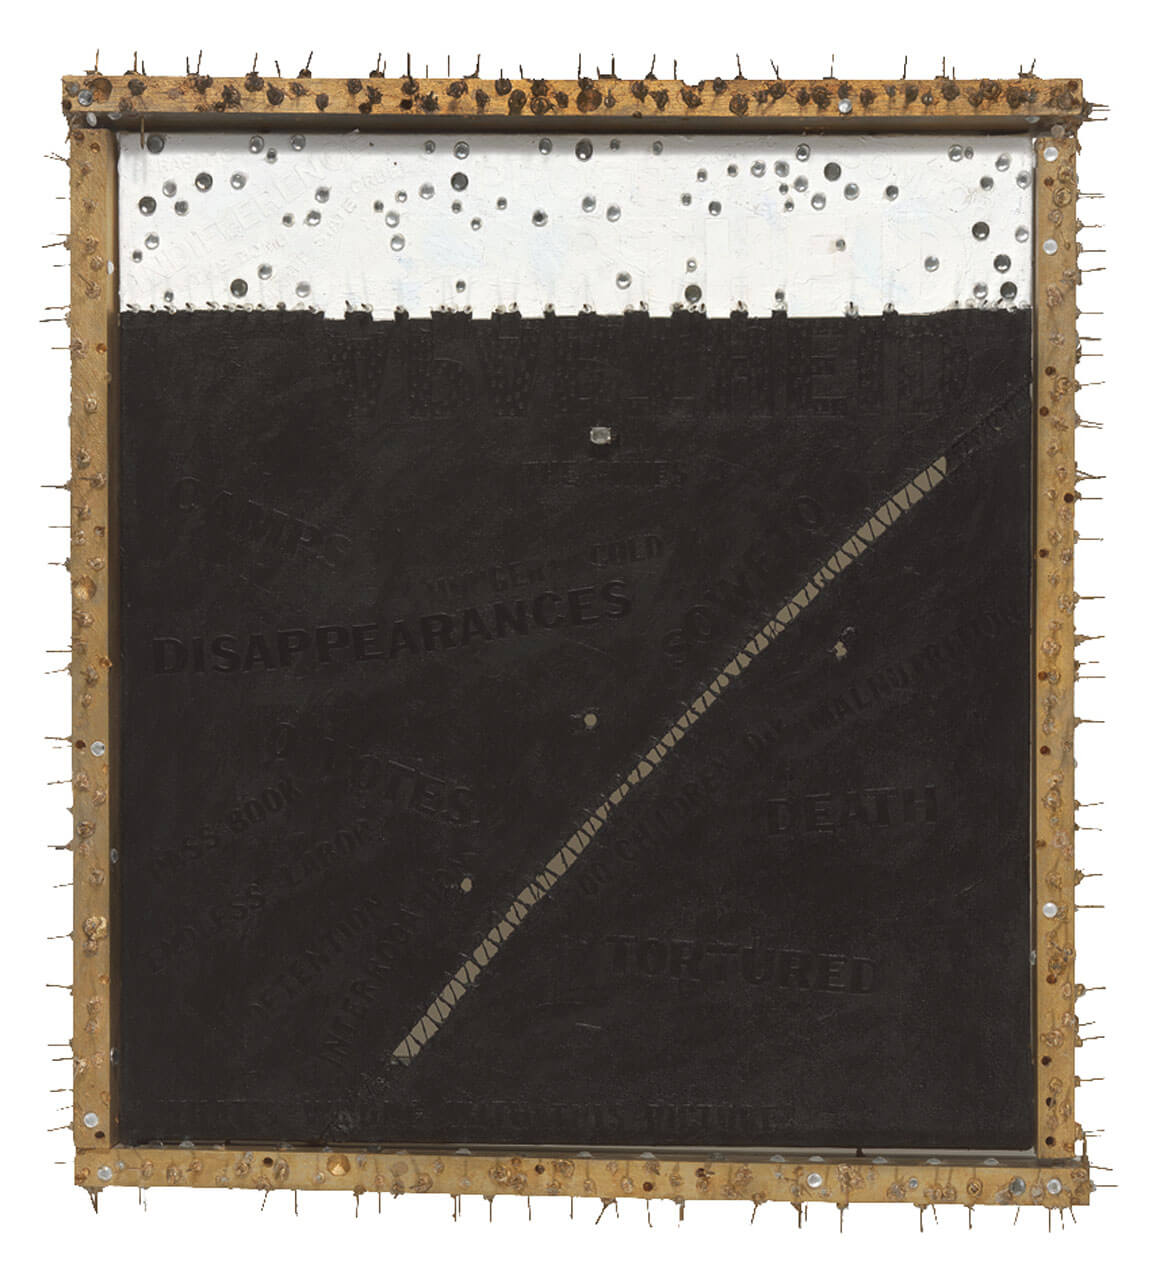 A mixed media artwork depicting apartheid in South Africa. The canvas is split into a black area and a white area, with each section containing various words in vinyl tape. There is a wooden frame around the plaster with nails protruding out from it.